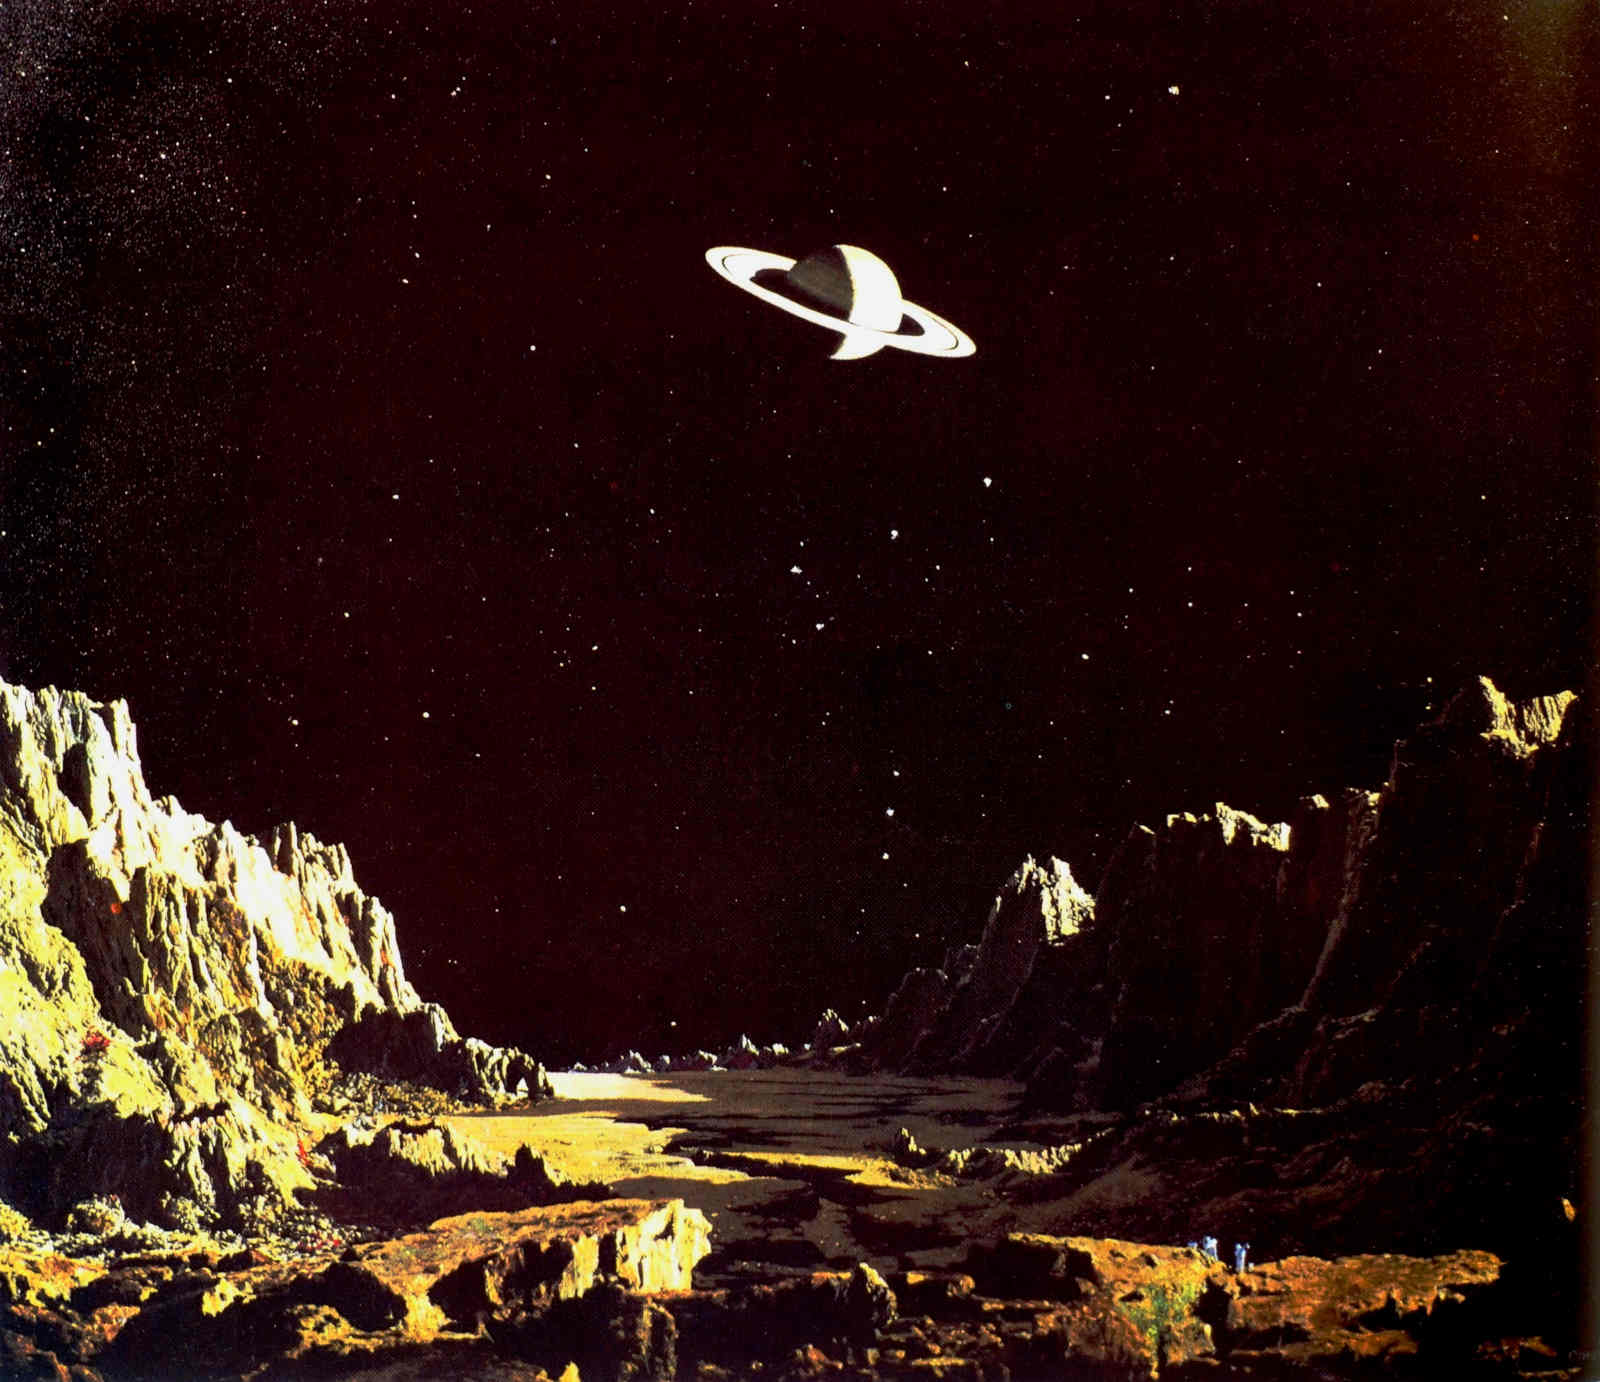 5 Saturn from its moon Iapetus by Chesley Bonestell. Published in Life Magazine (1944) C3